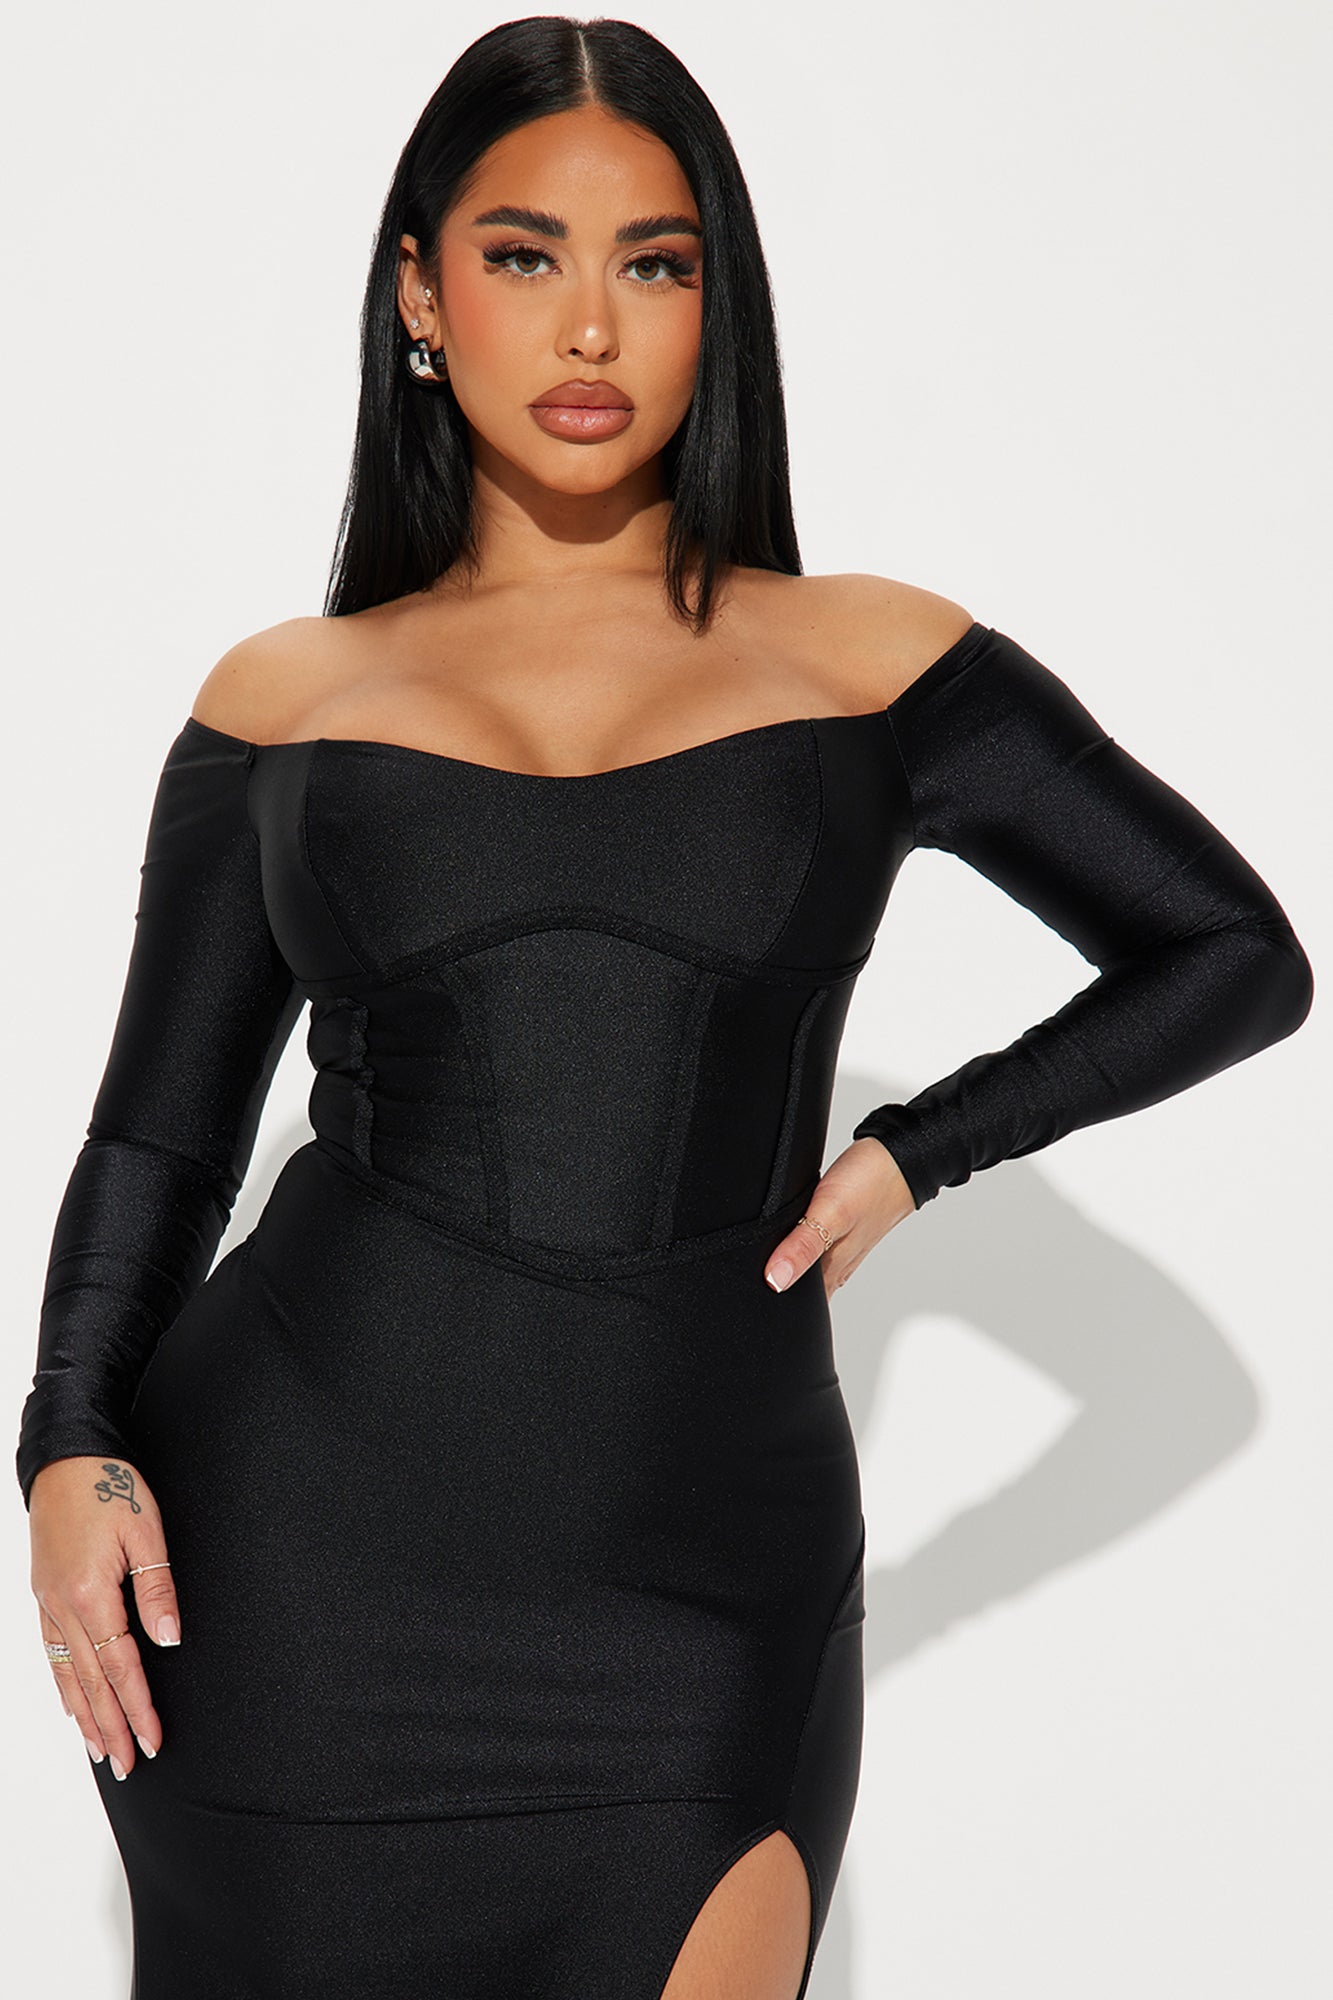 Plus Size Cut Out Mesh Cut Out Long Sleeve Velvet High Neck, No Peaking Maxi Dress in Black, Size 1X, For Holiday Party Or NYE | Fashion Nova